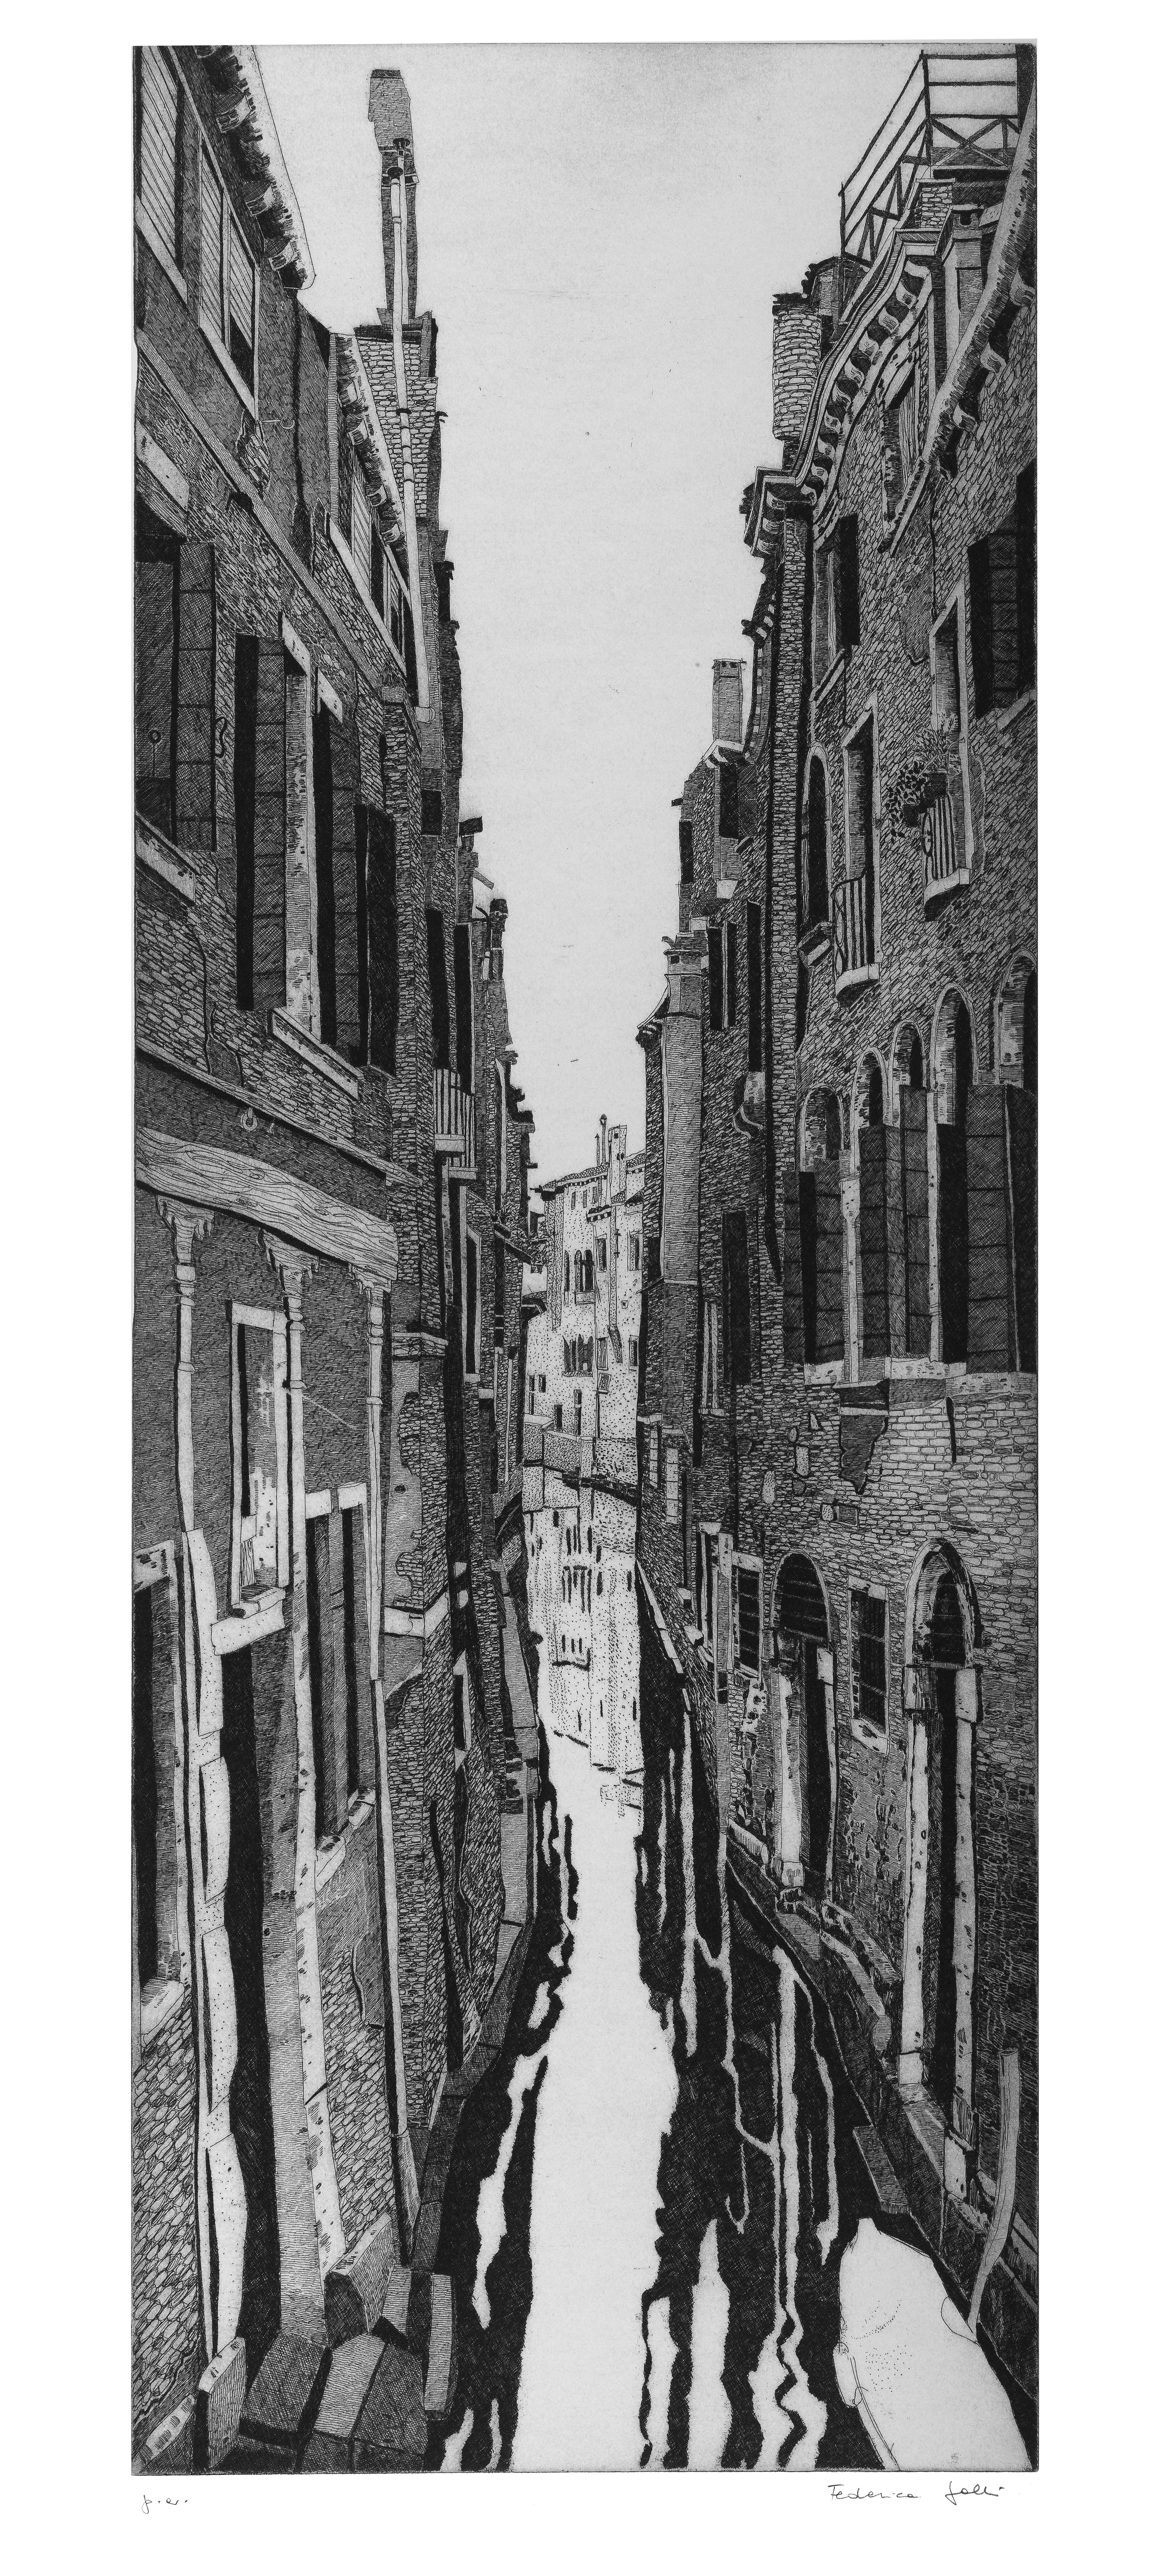 Venice views, rare complete collection, 39 prints different sizes - Black Figurative Print by Federica Galli